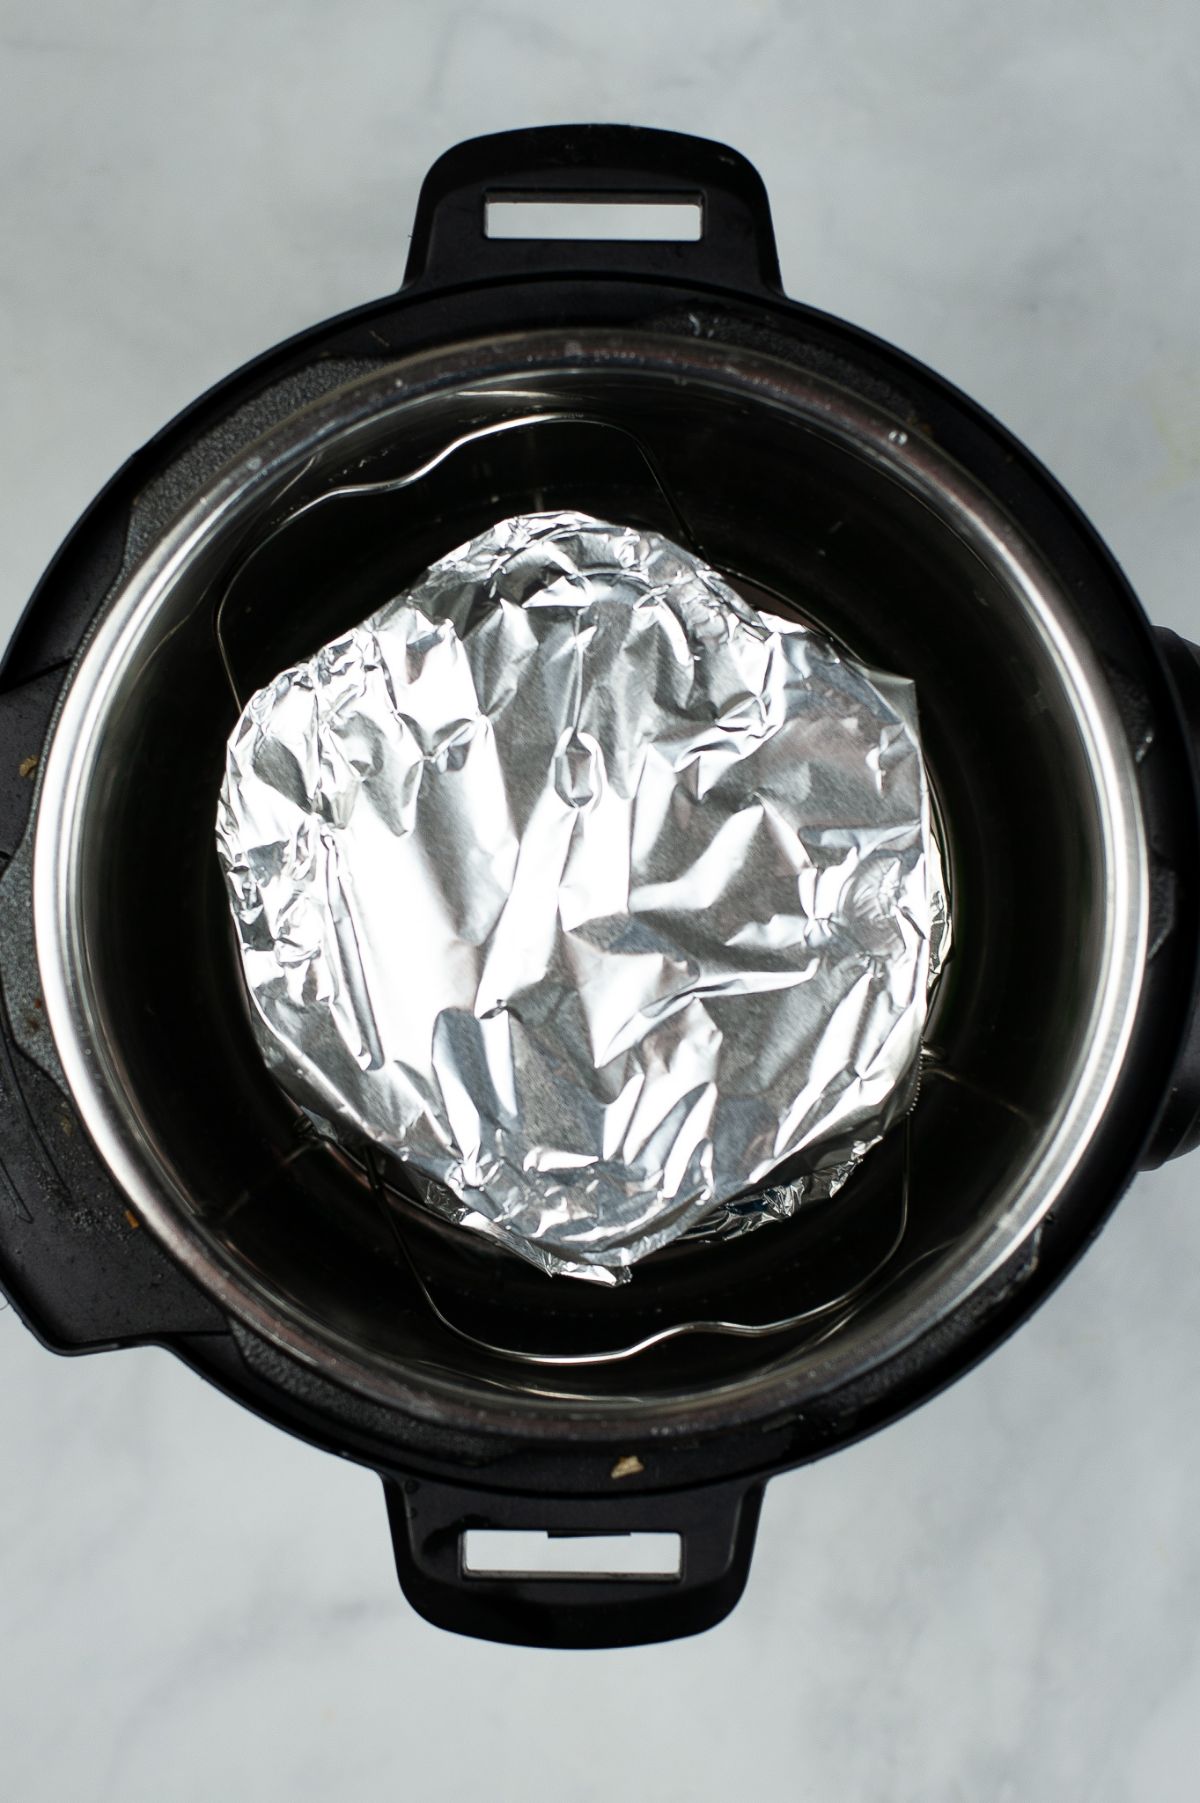 Filled egg mold covered with foil in an instant pot